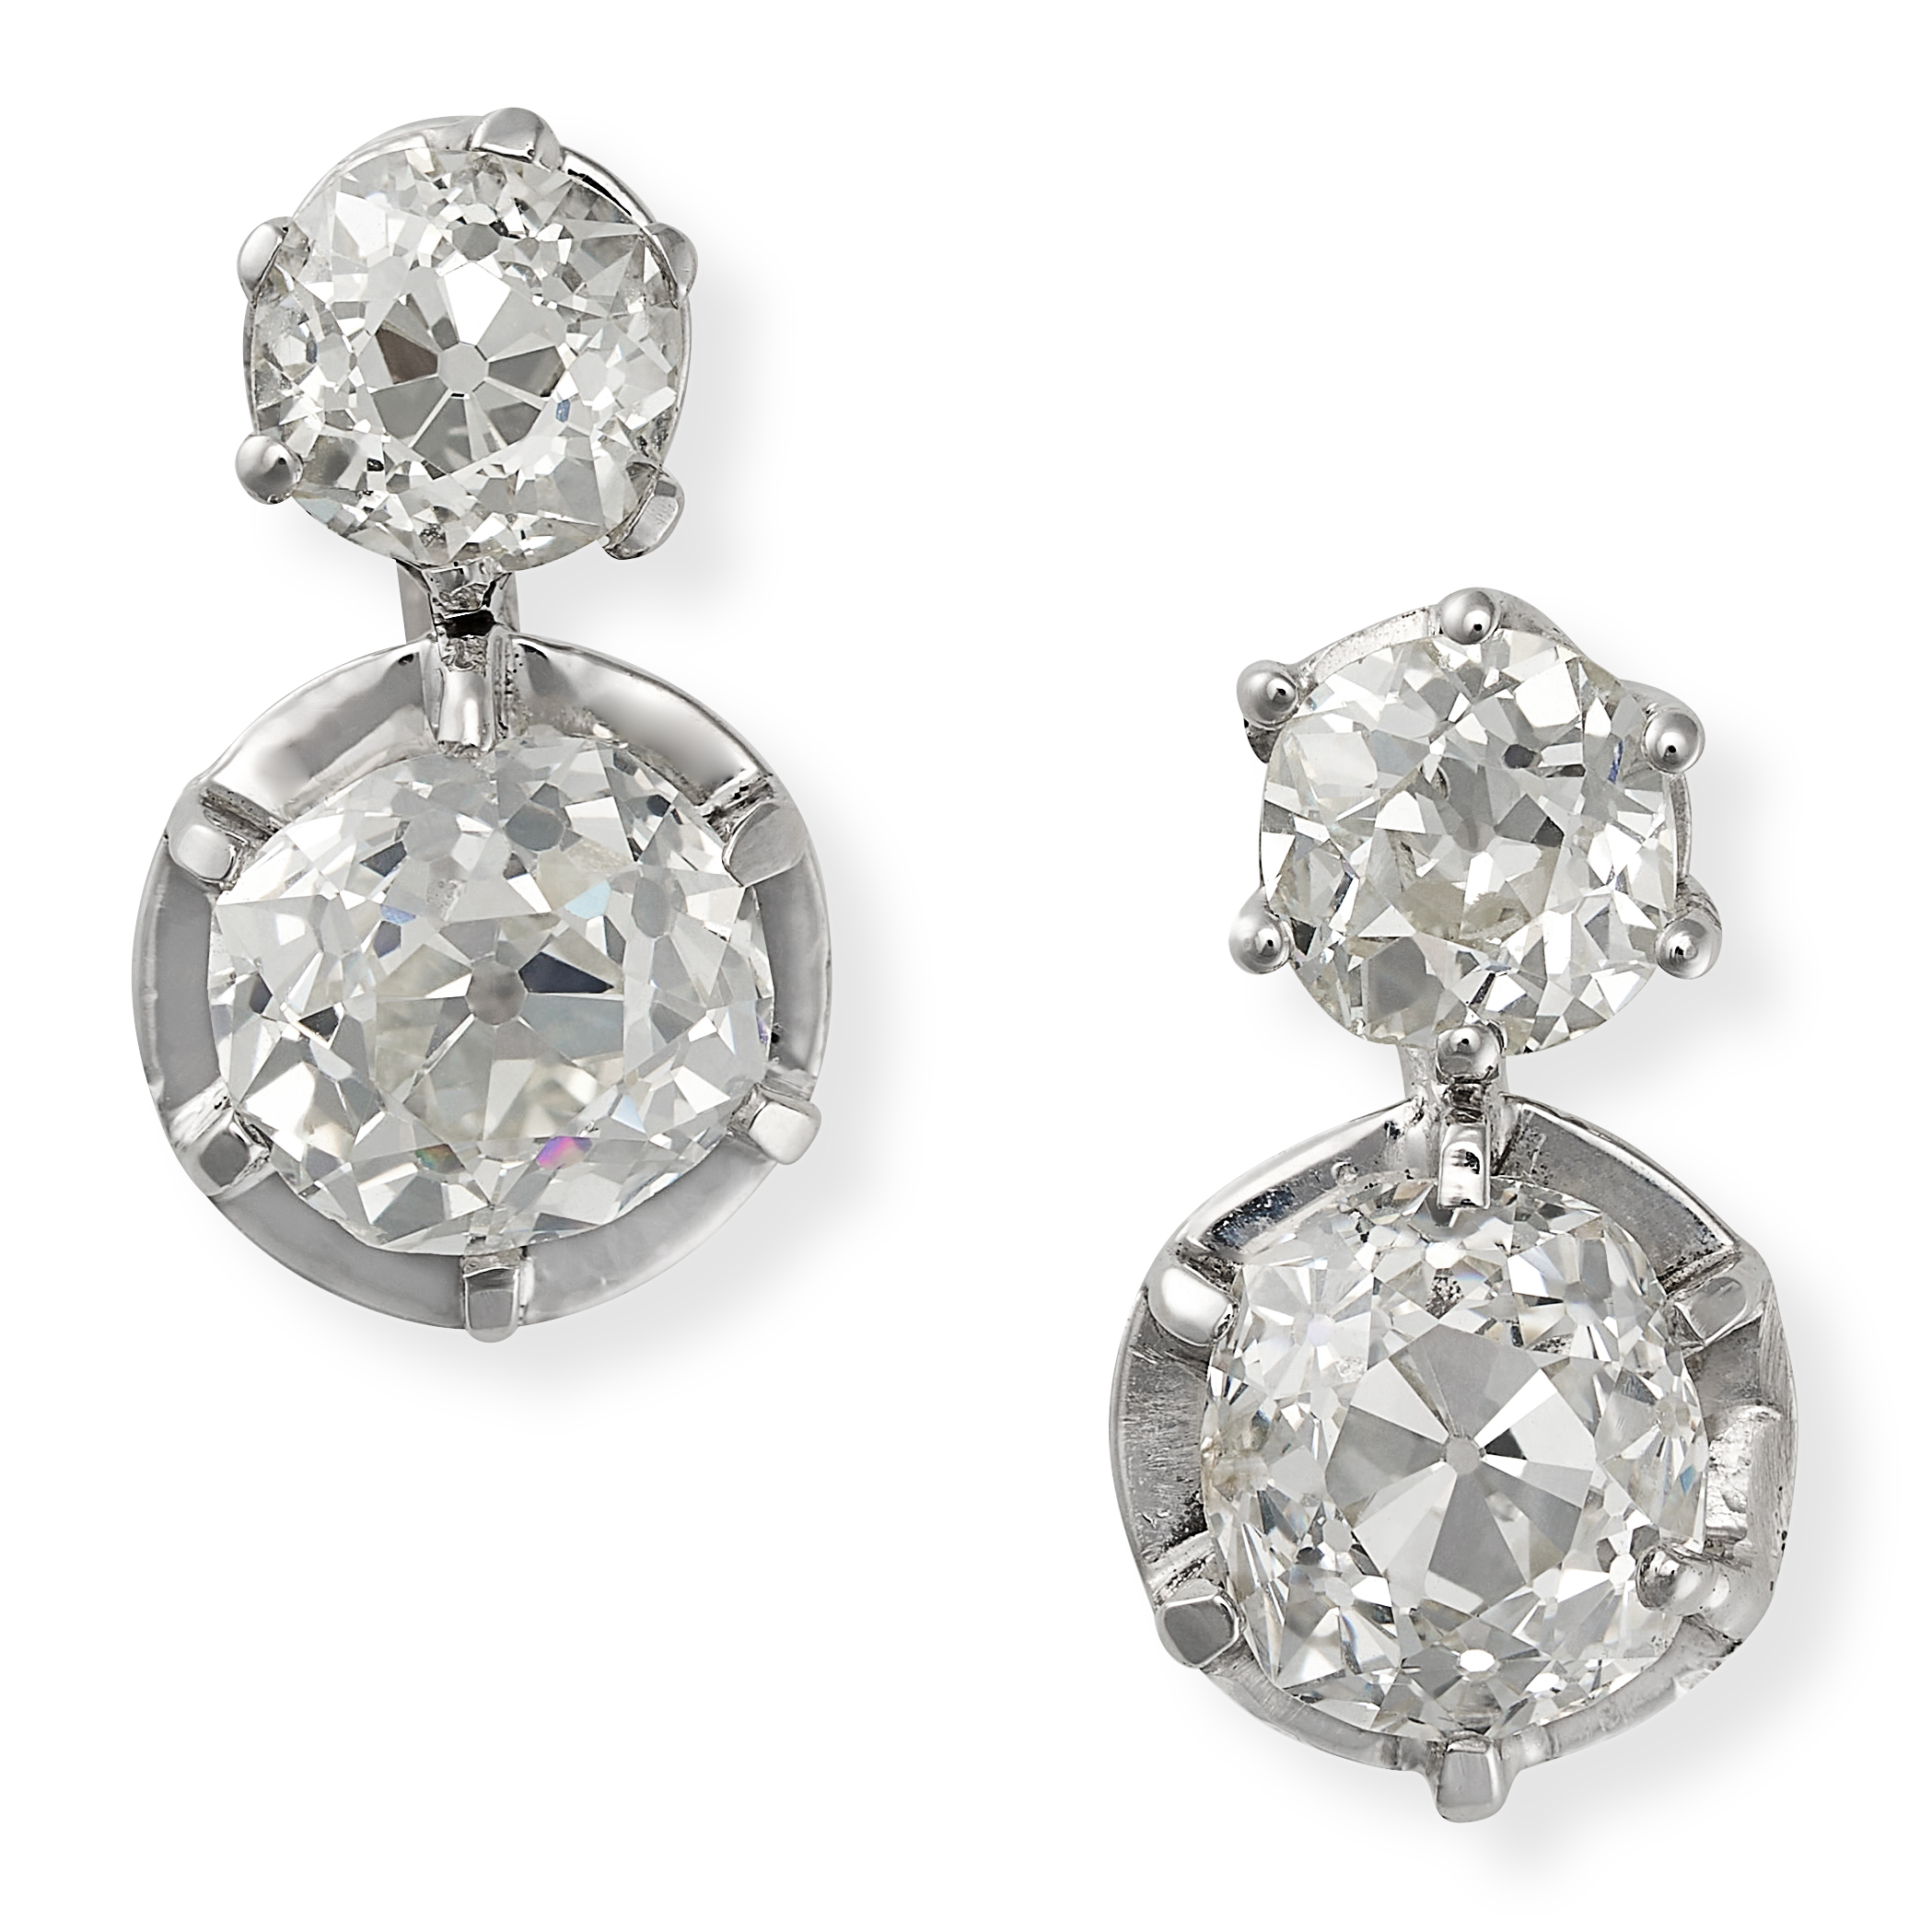 A PAIR OF FINE DIAMOND DROP EARRINGS in 18ct white gold, each set with a principle old cut diamon...